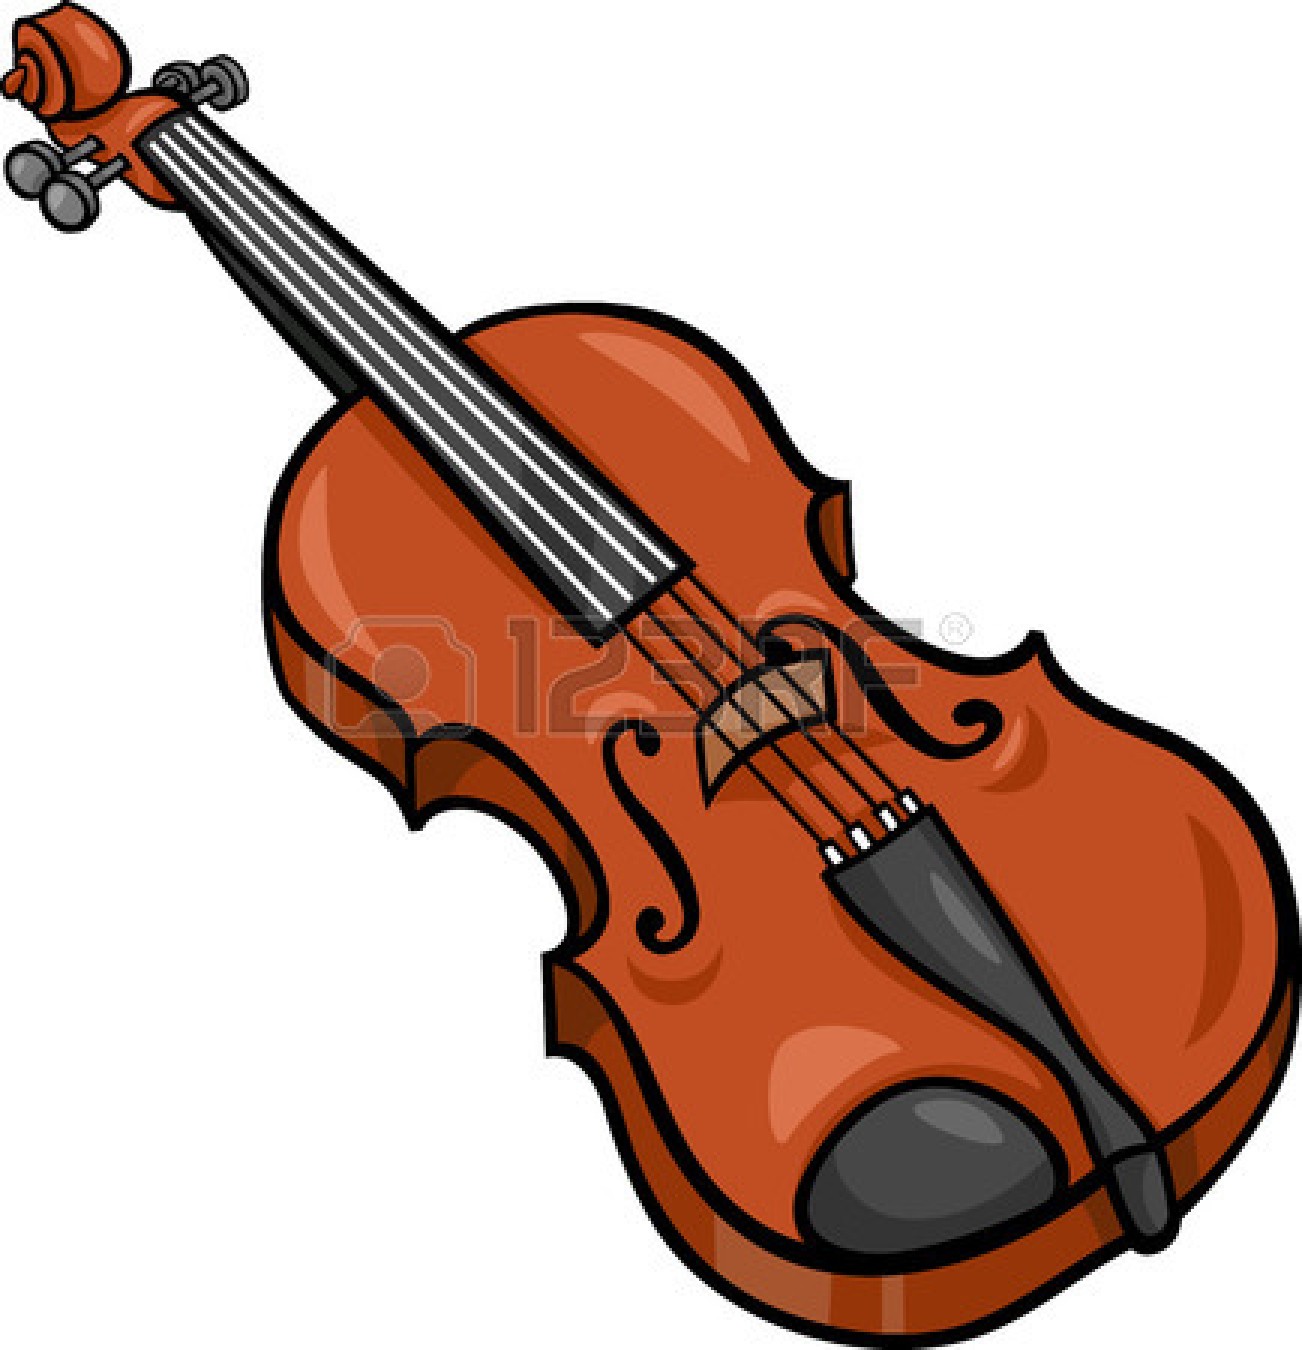 You can use this small violin